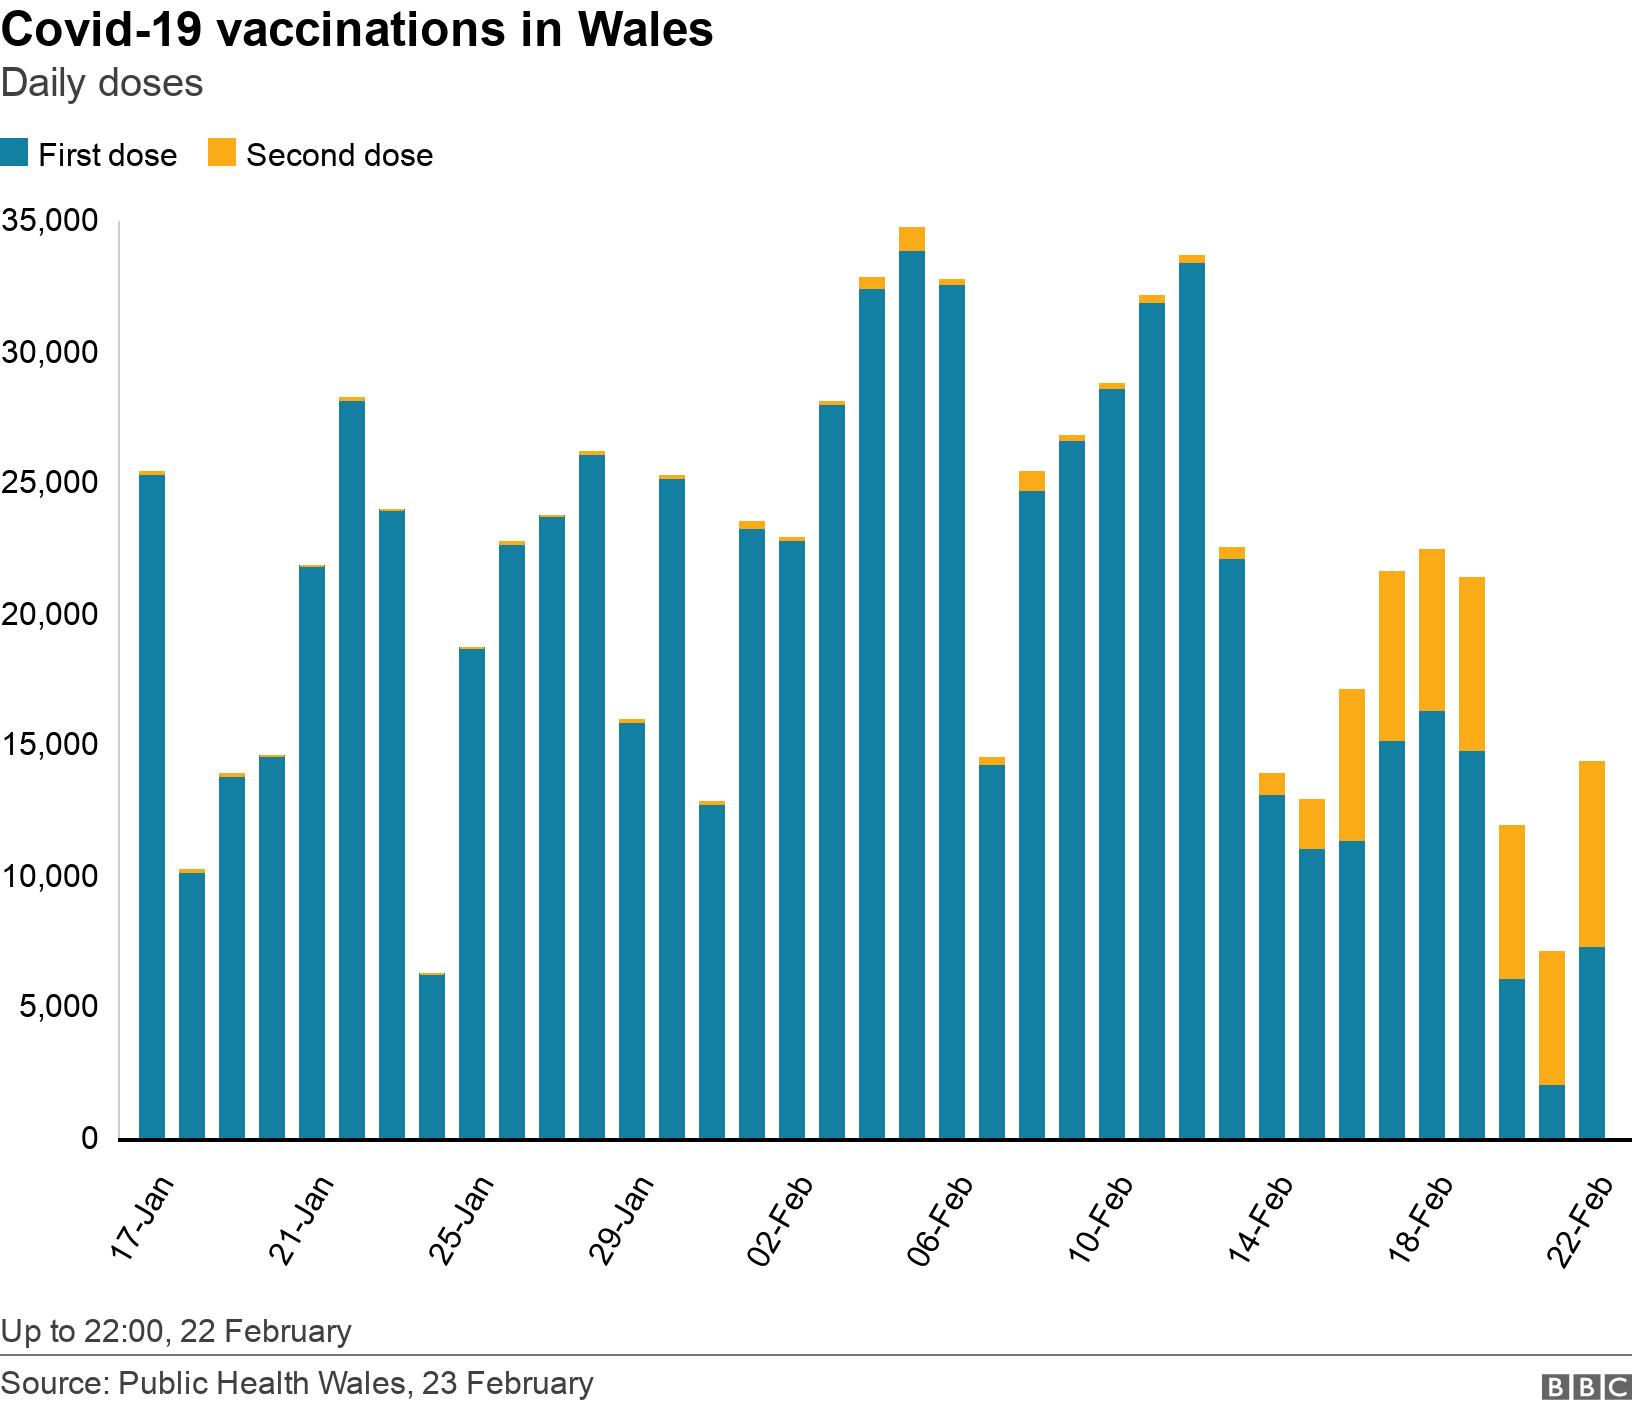 Covid-19 vaccinations in Wales. Daily doses .  Up to 22:00, 22 February.